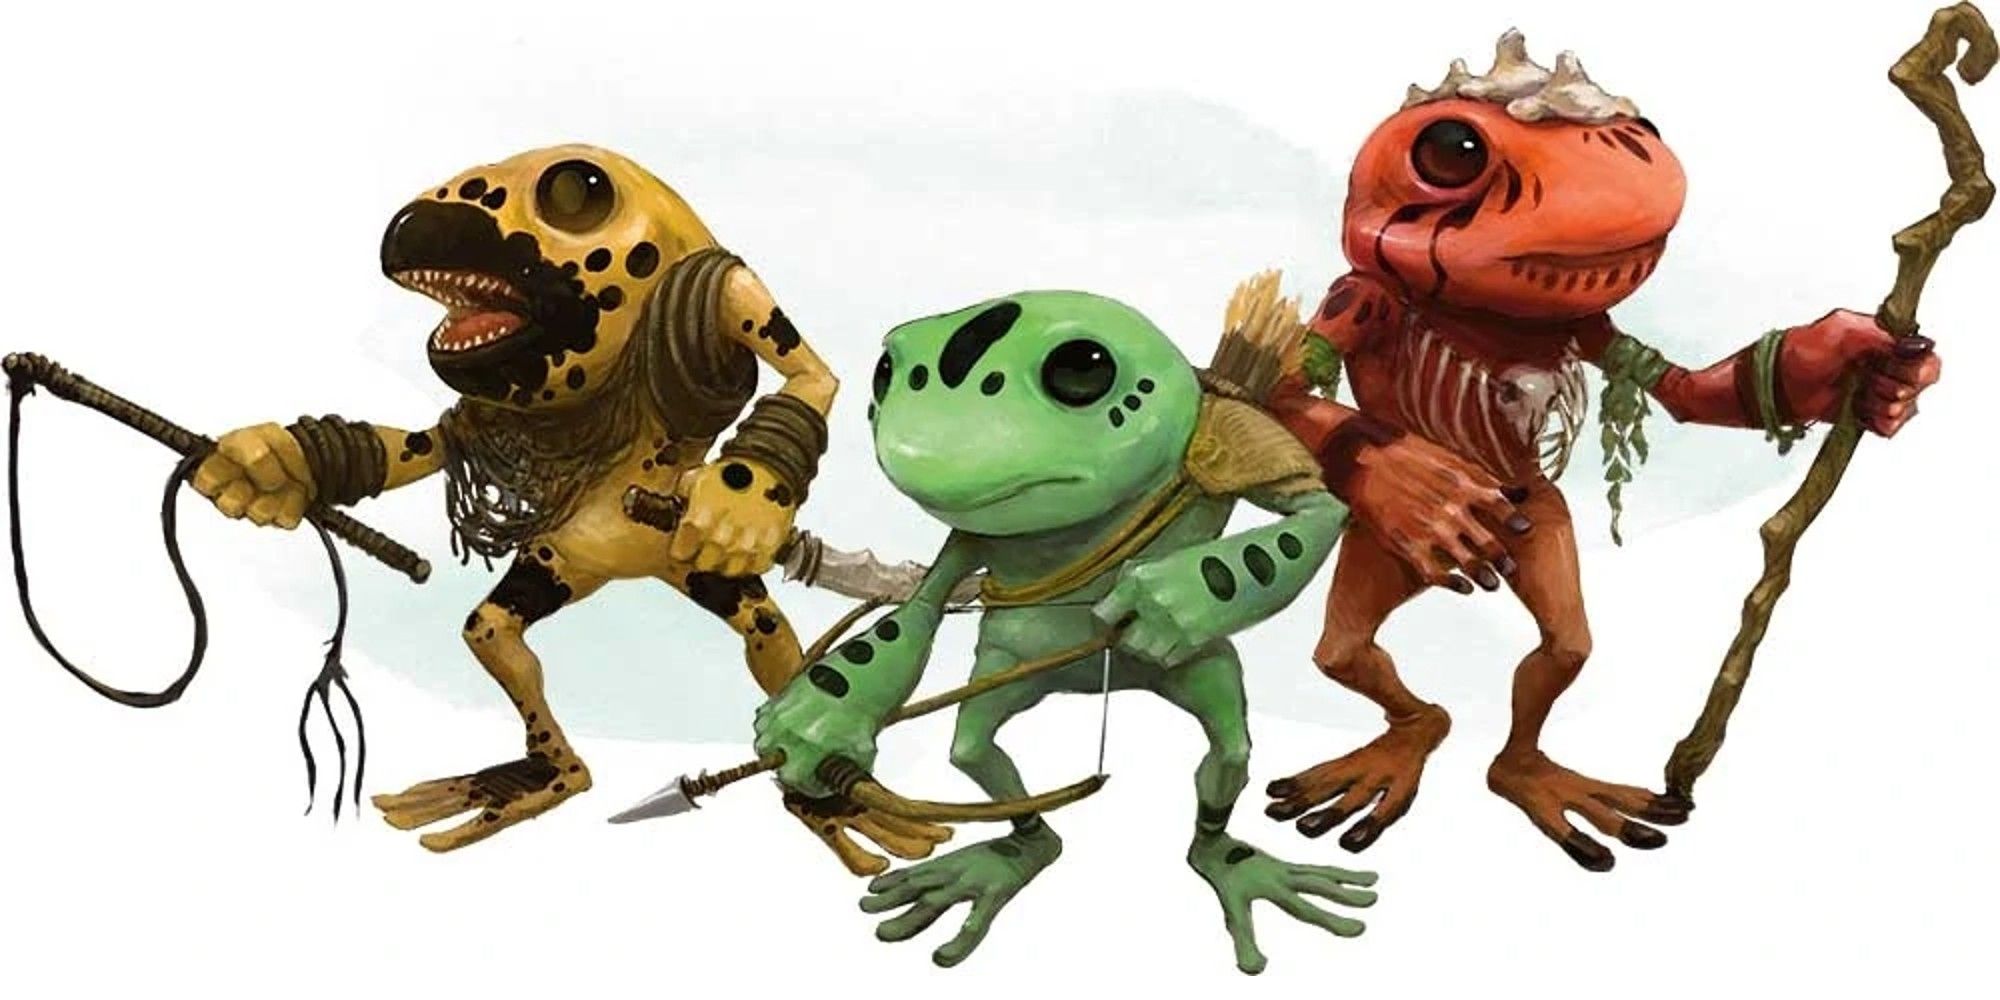 Grung from Dungeons & Dragons, including yellow, green and red variants with different tools